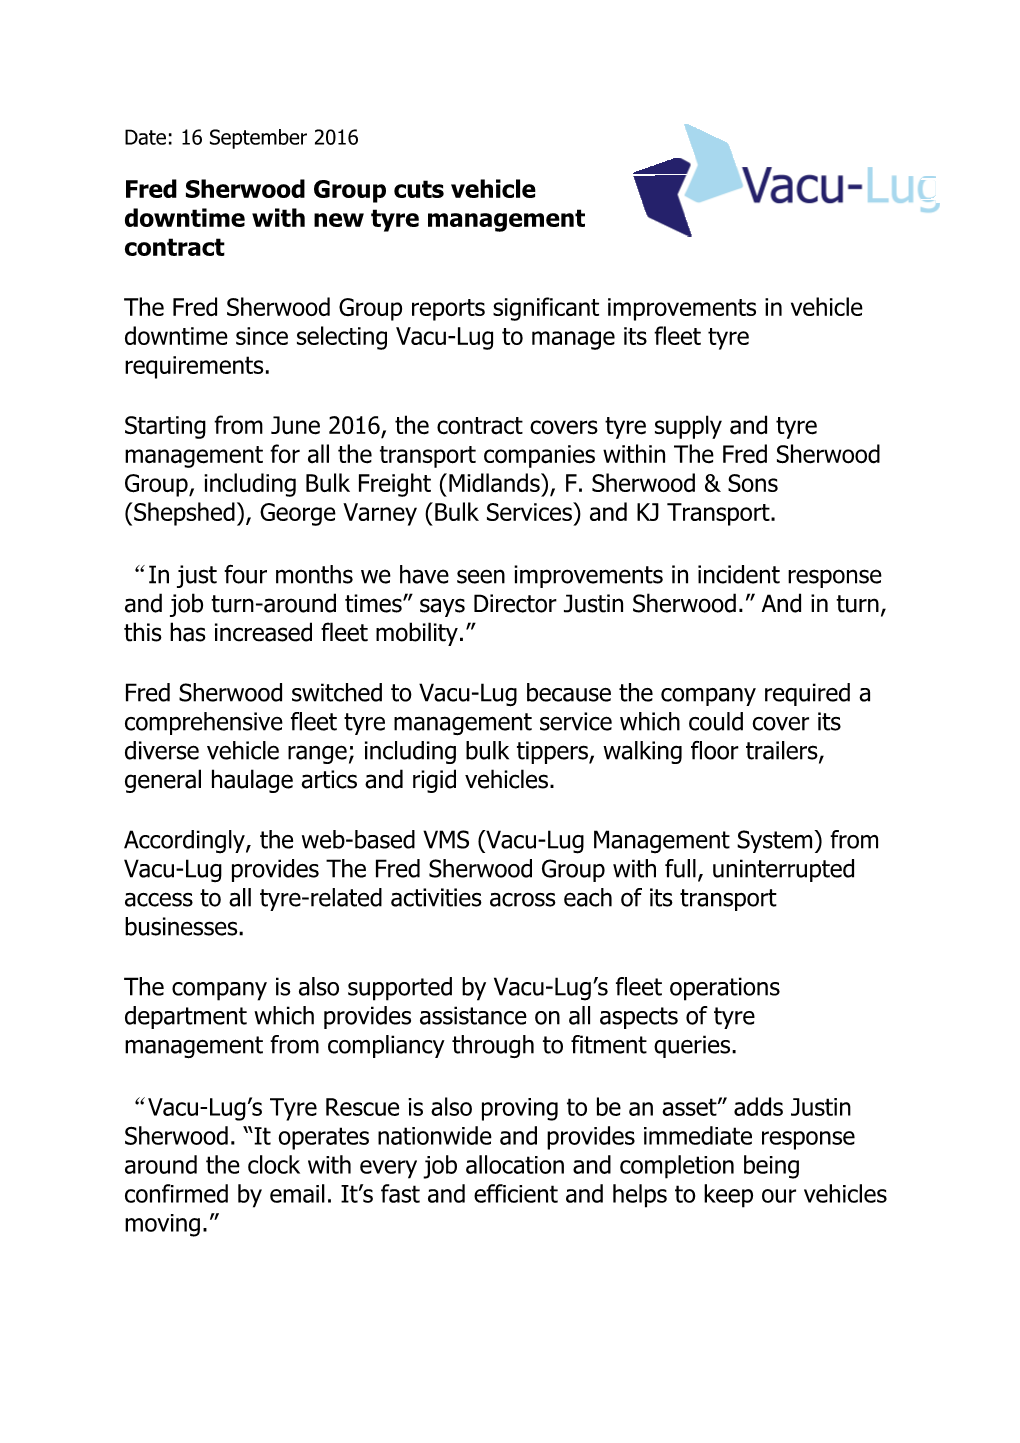 Fred Sherwood Group Cuts Vehicle Downtime with New Tyre Management Contract